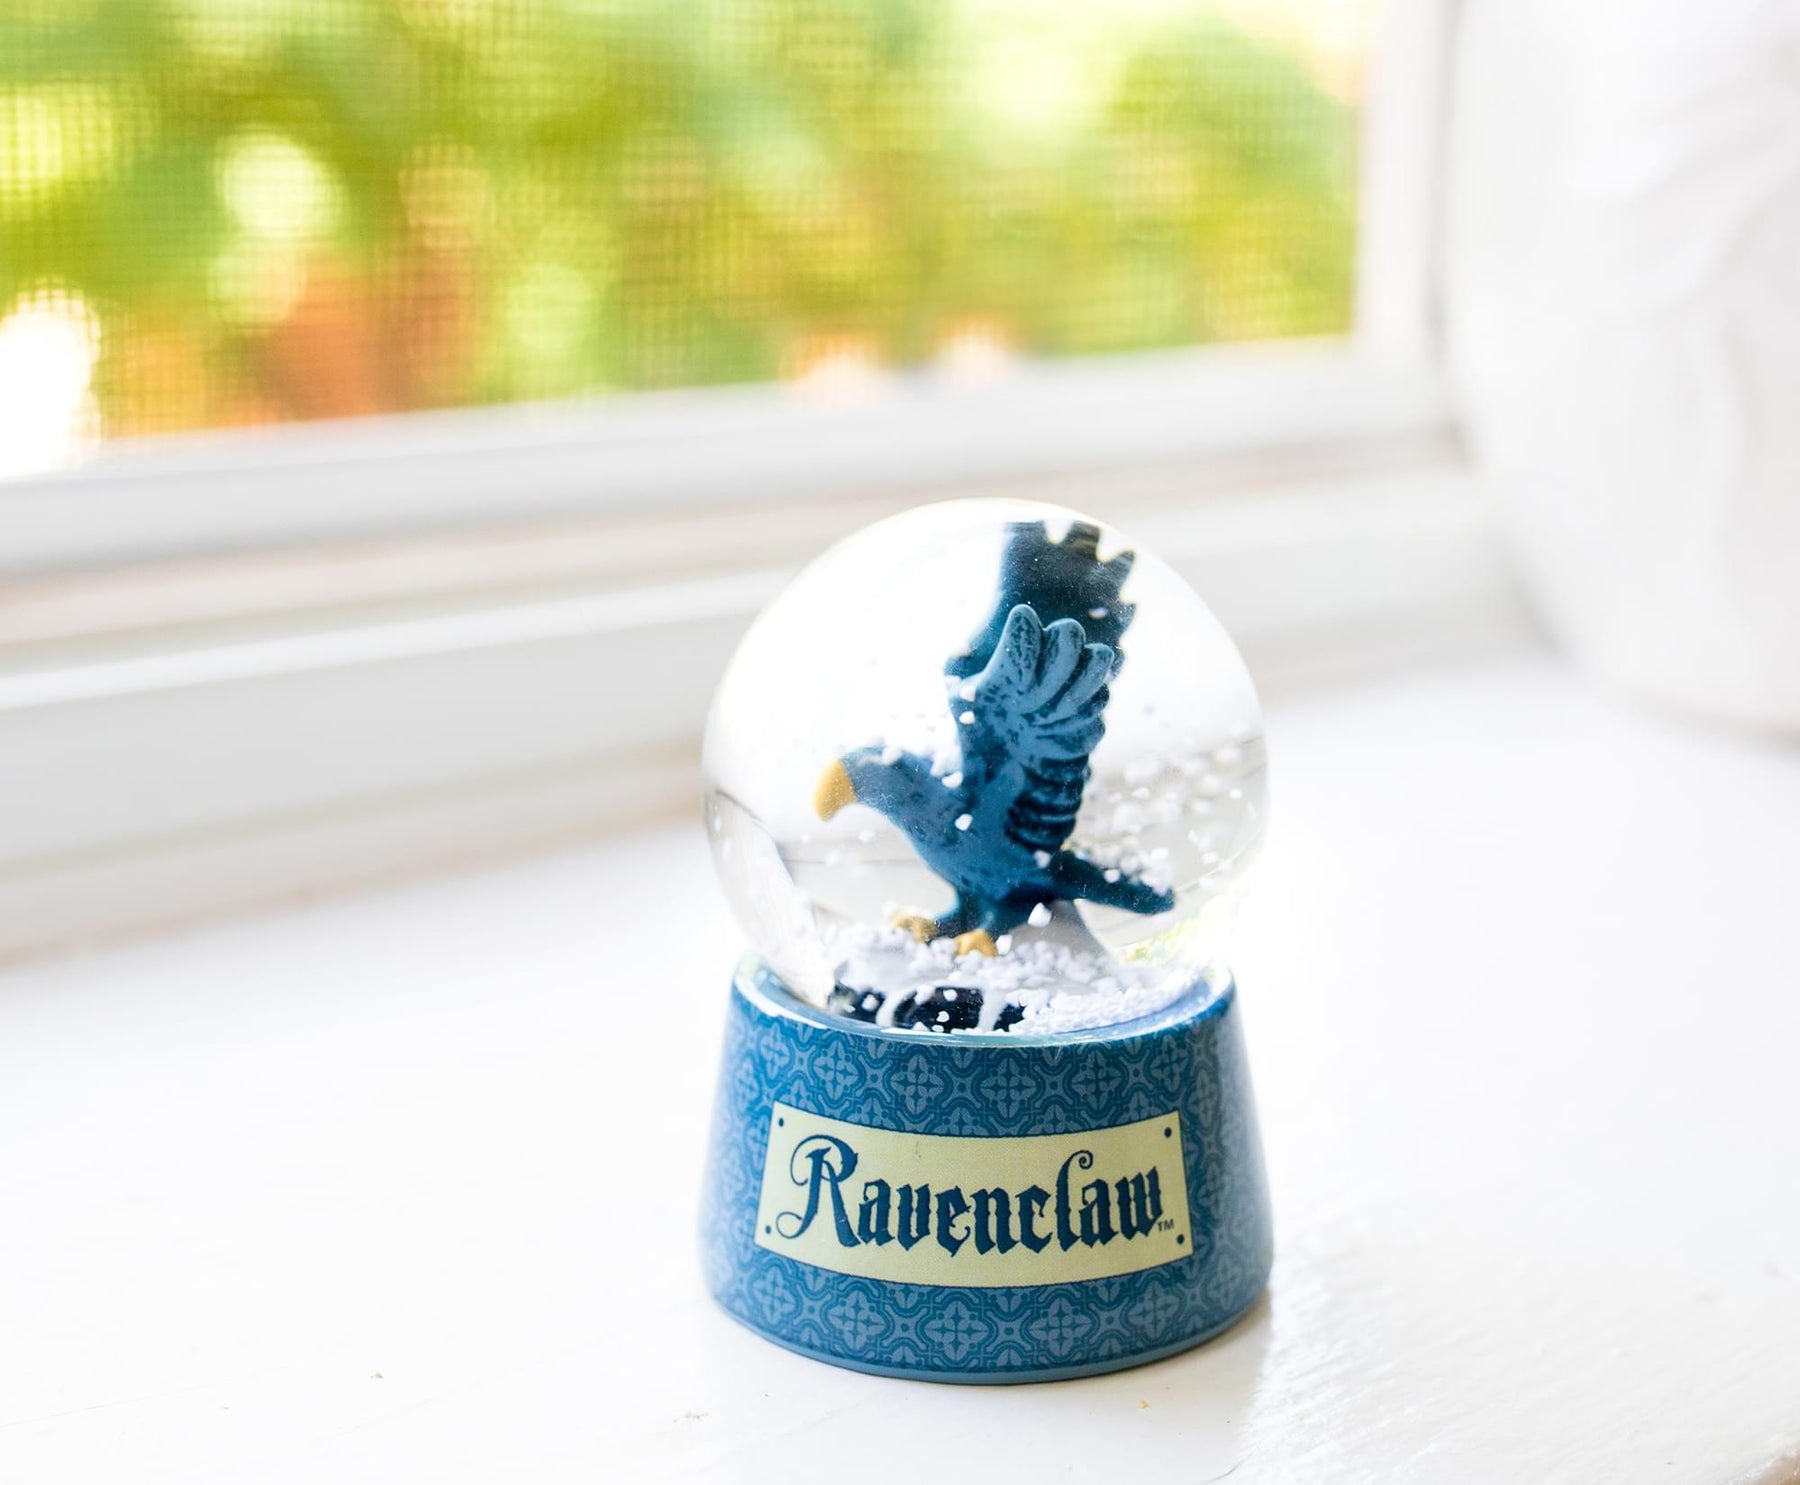 Harry Potter House Ravenclaw Collectible Snow Globe | 3 Inches Tall